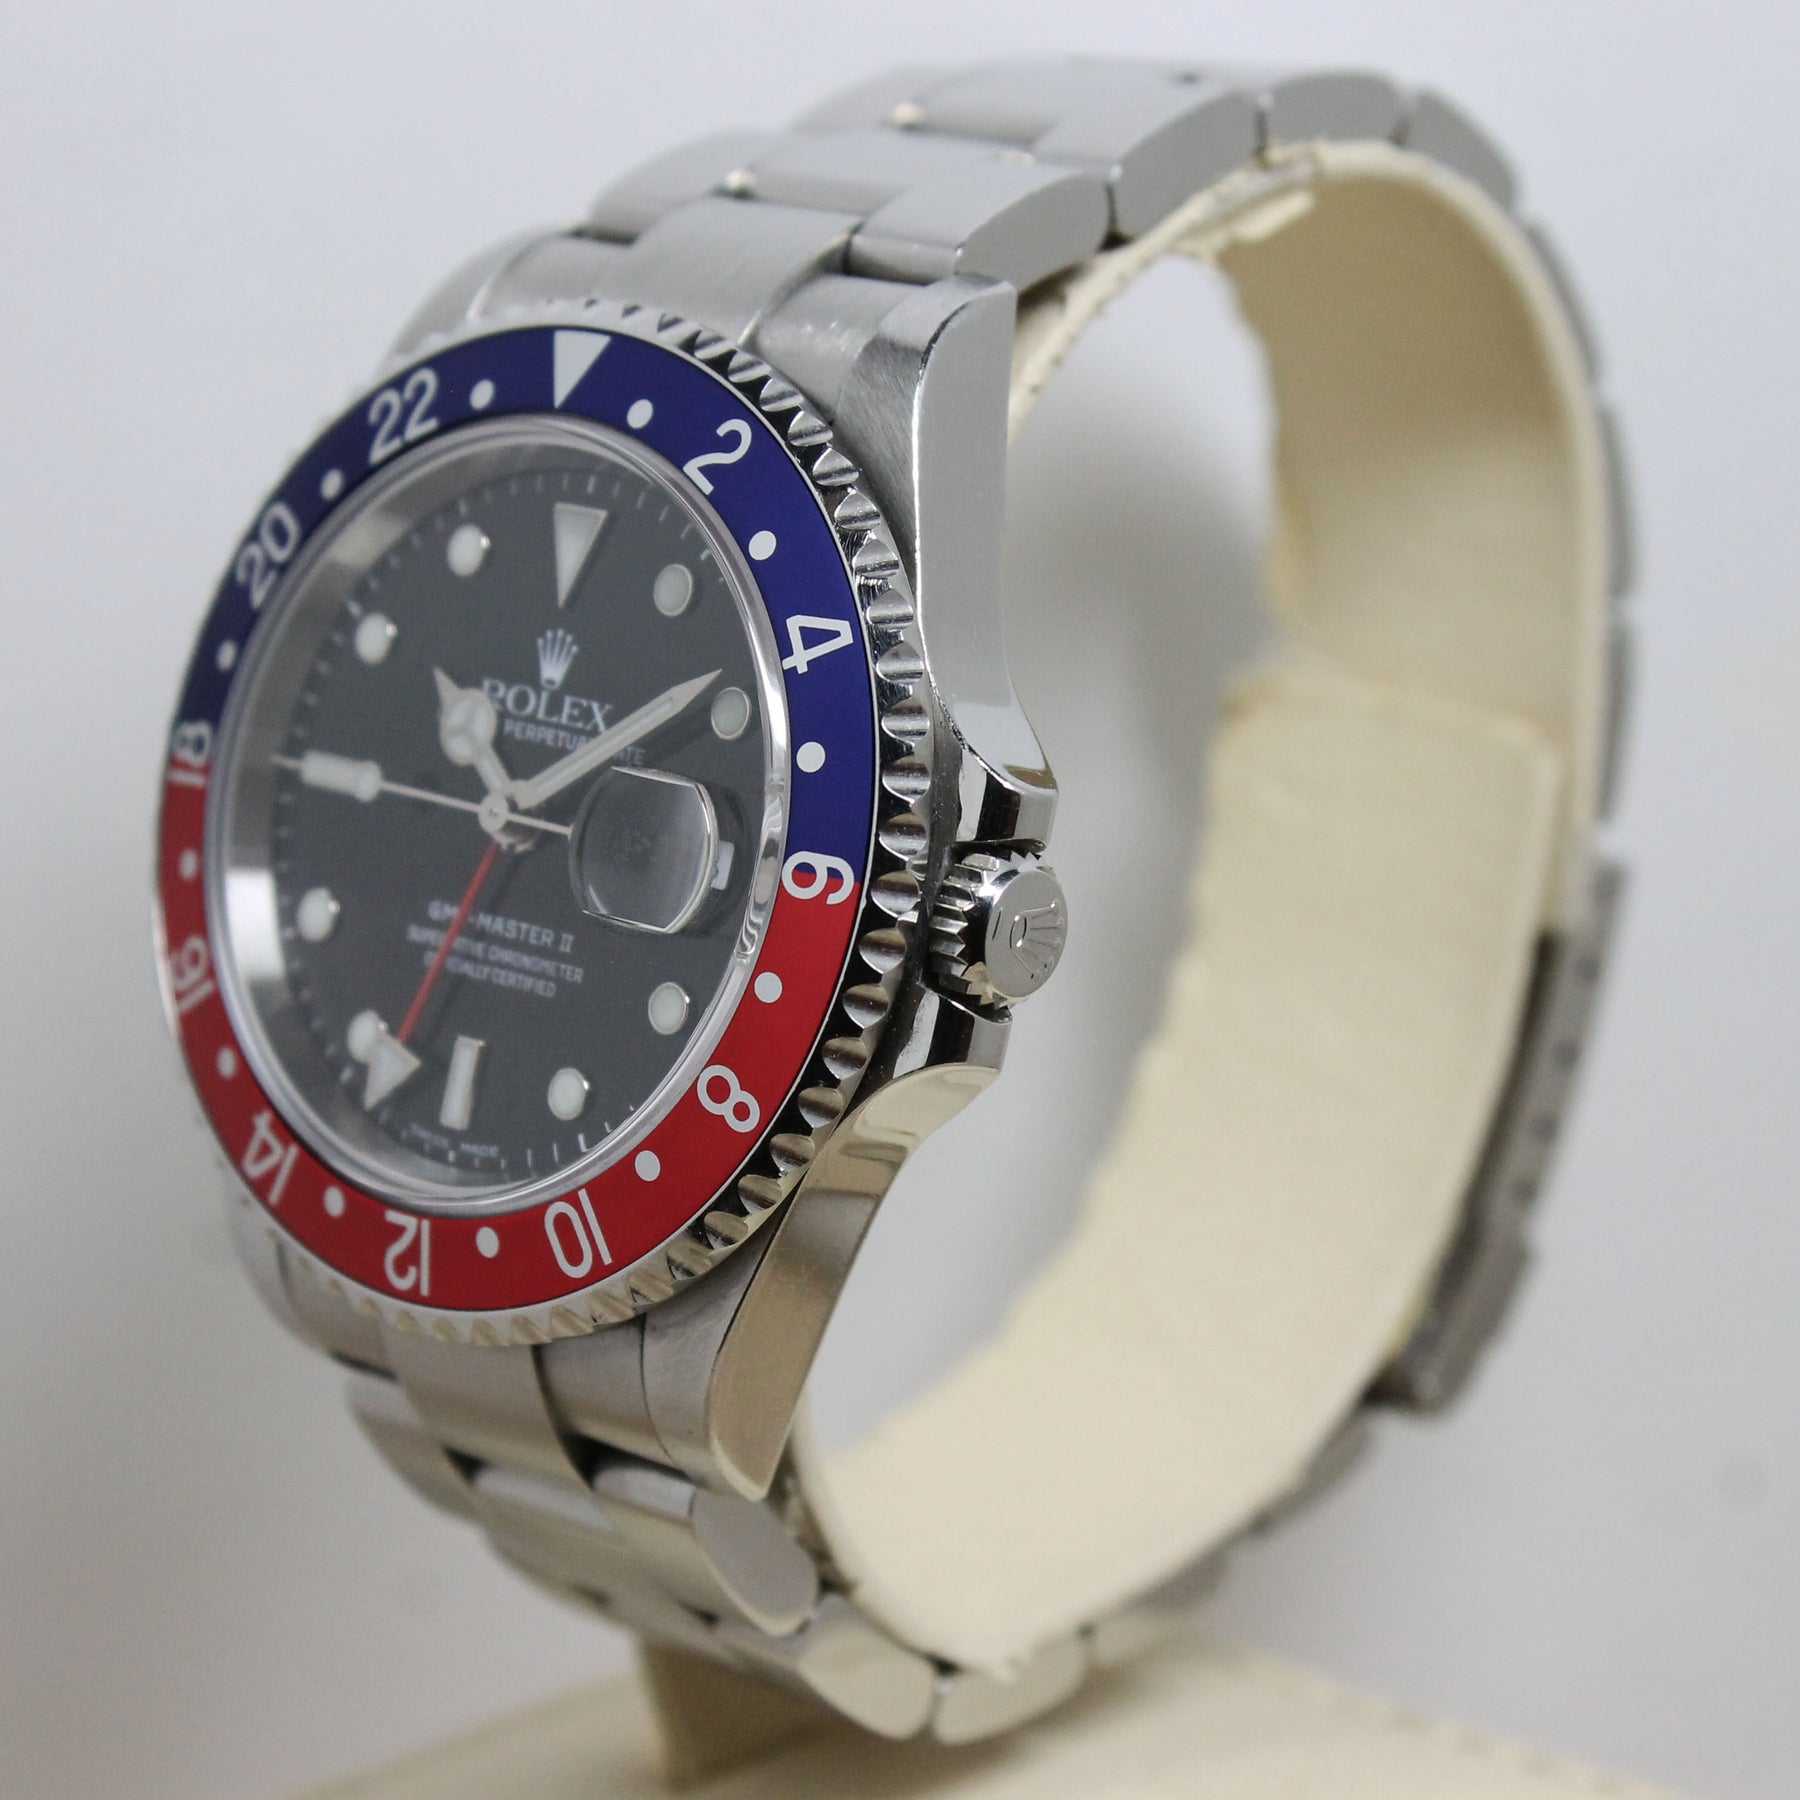 2005 Rolex GMT Master II Pepsi Unpolished Ref. 16710 (with Papers)